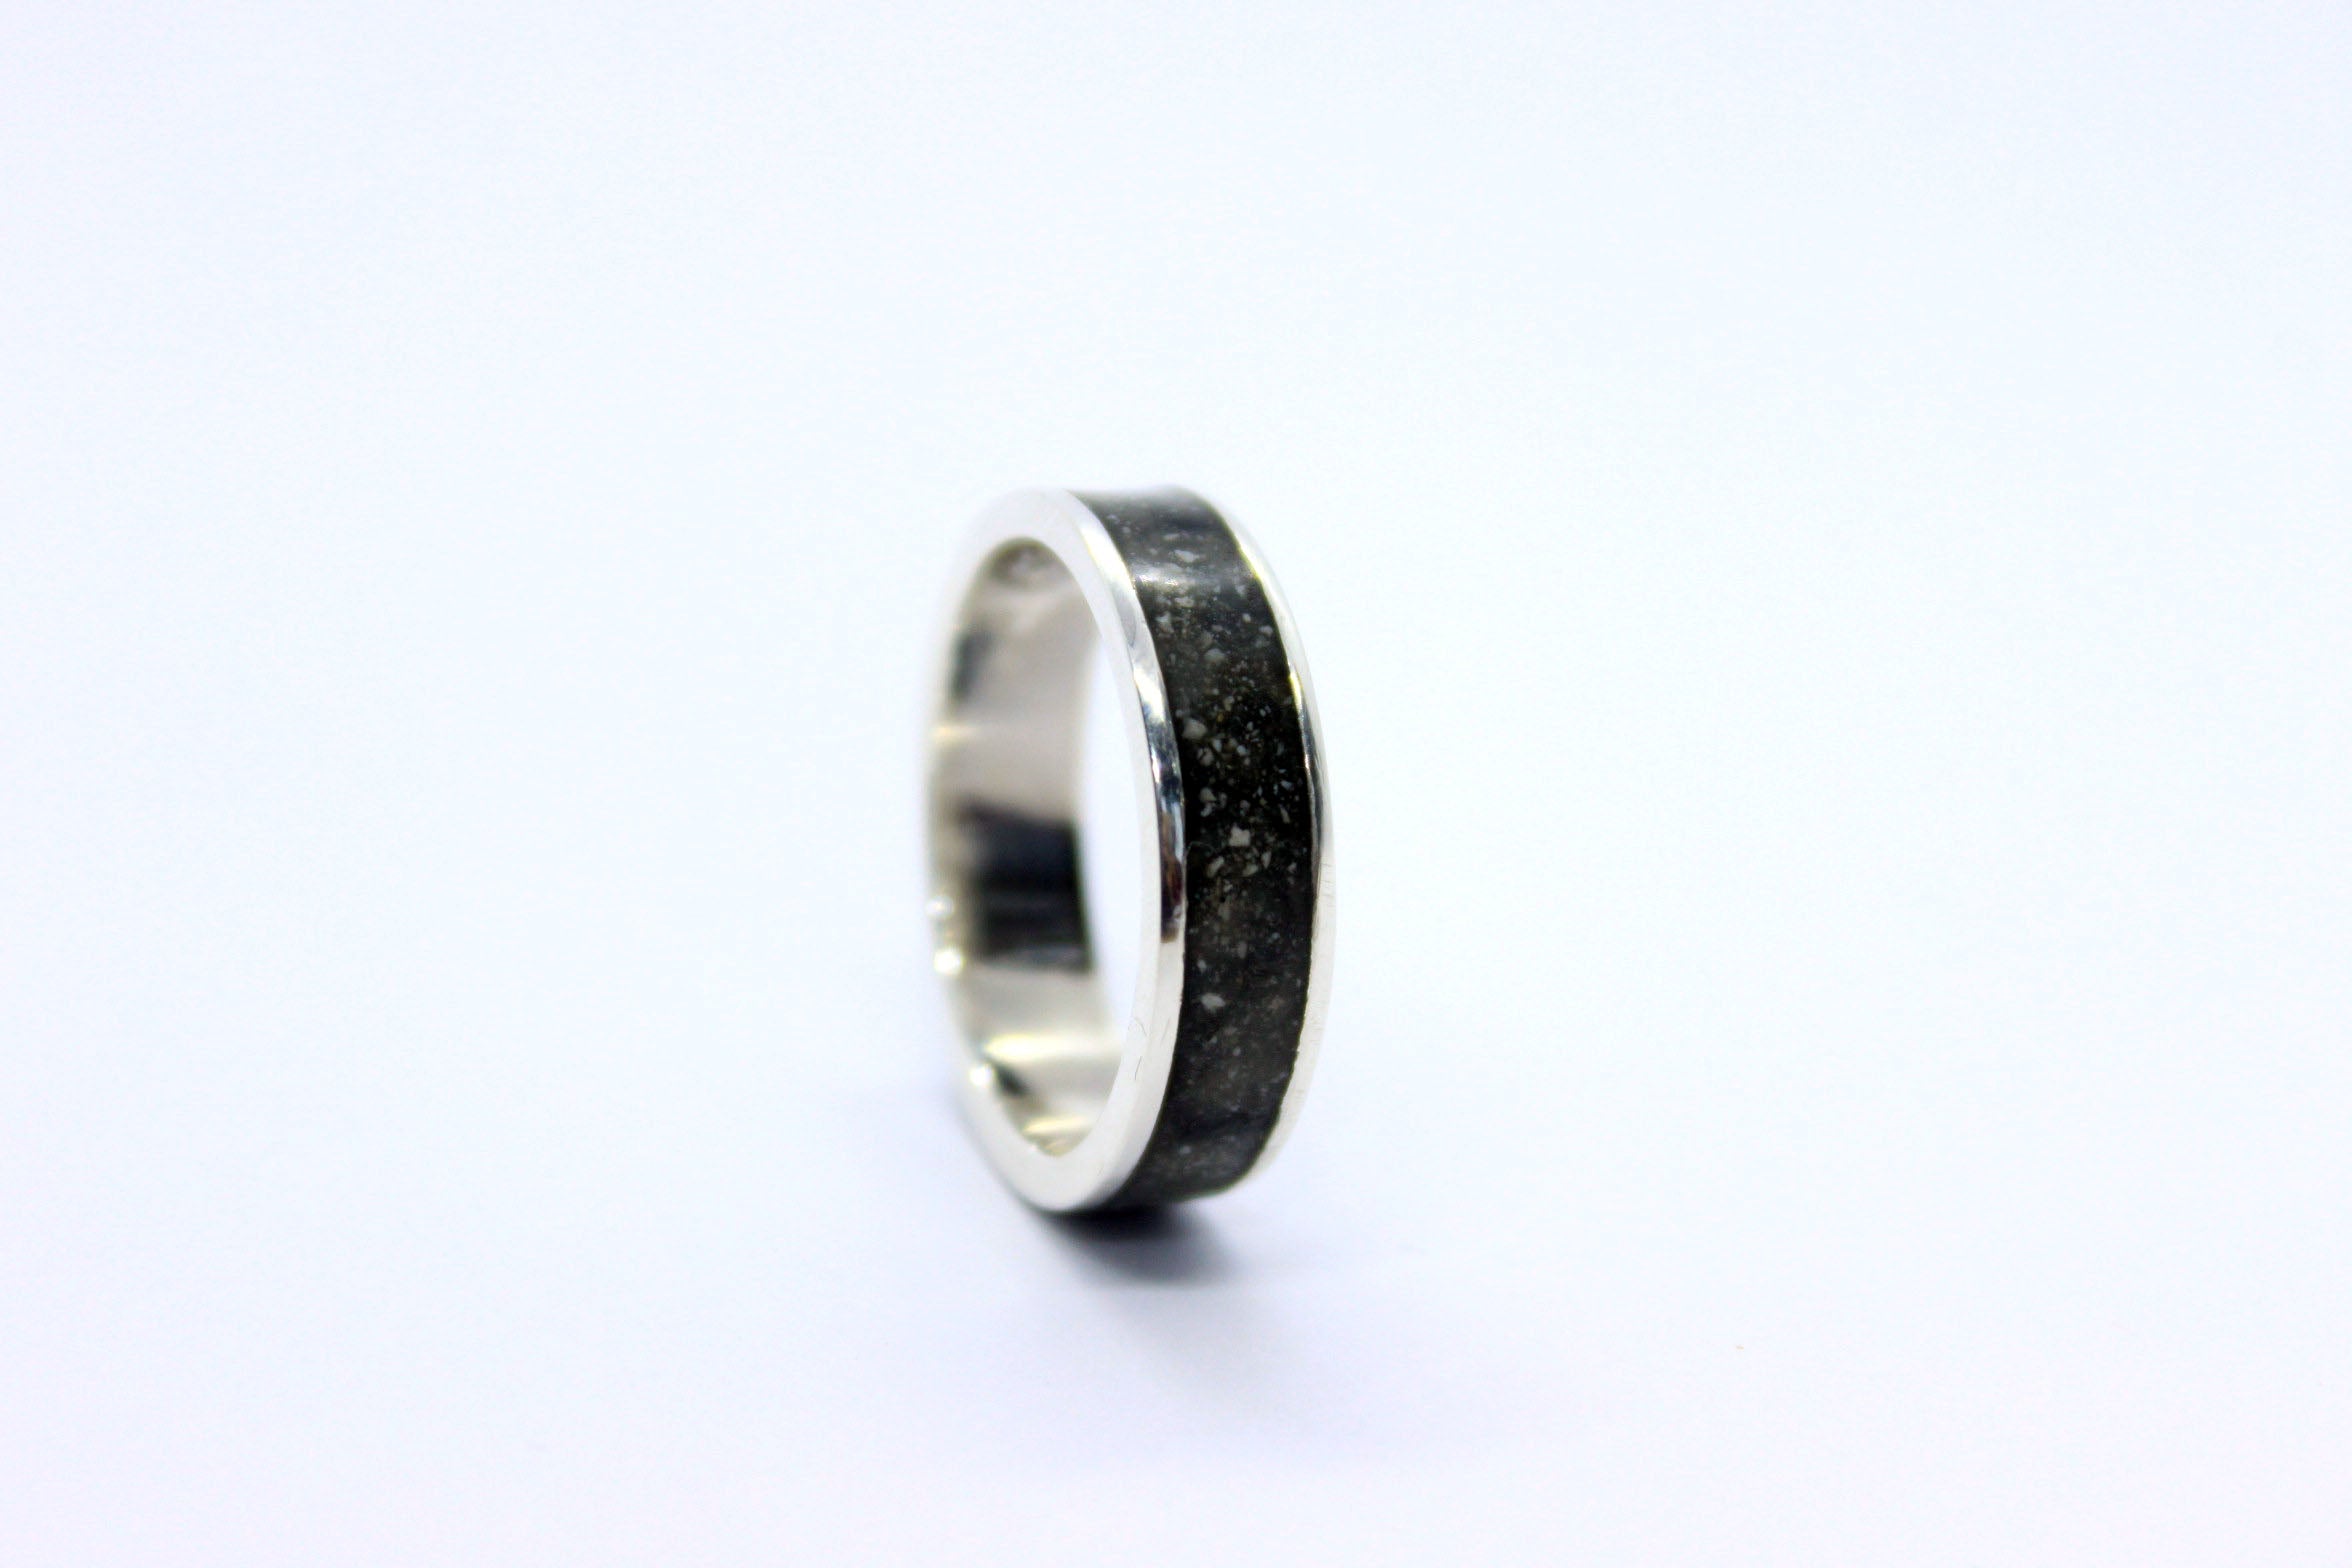 cremation jewelry, memorial jewelry, jewelry made with ashes, cremation ring